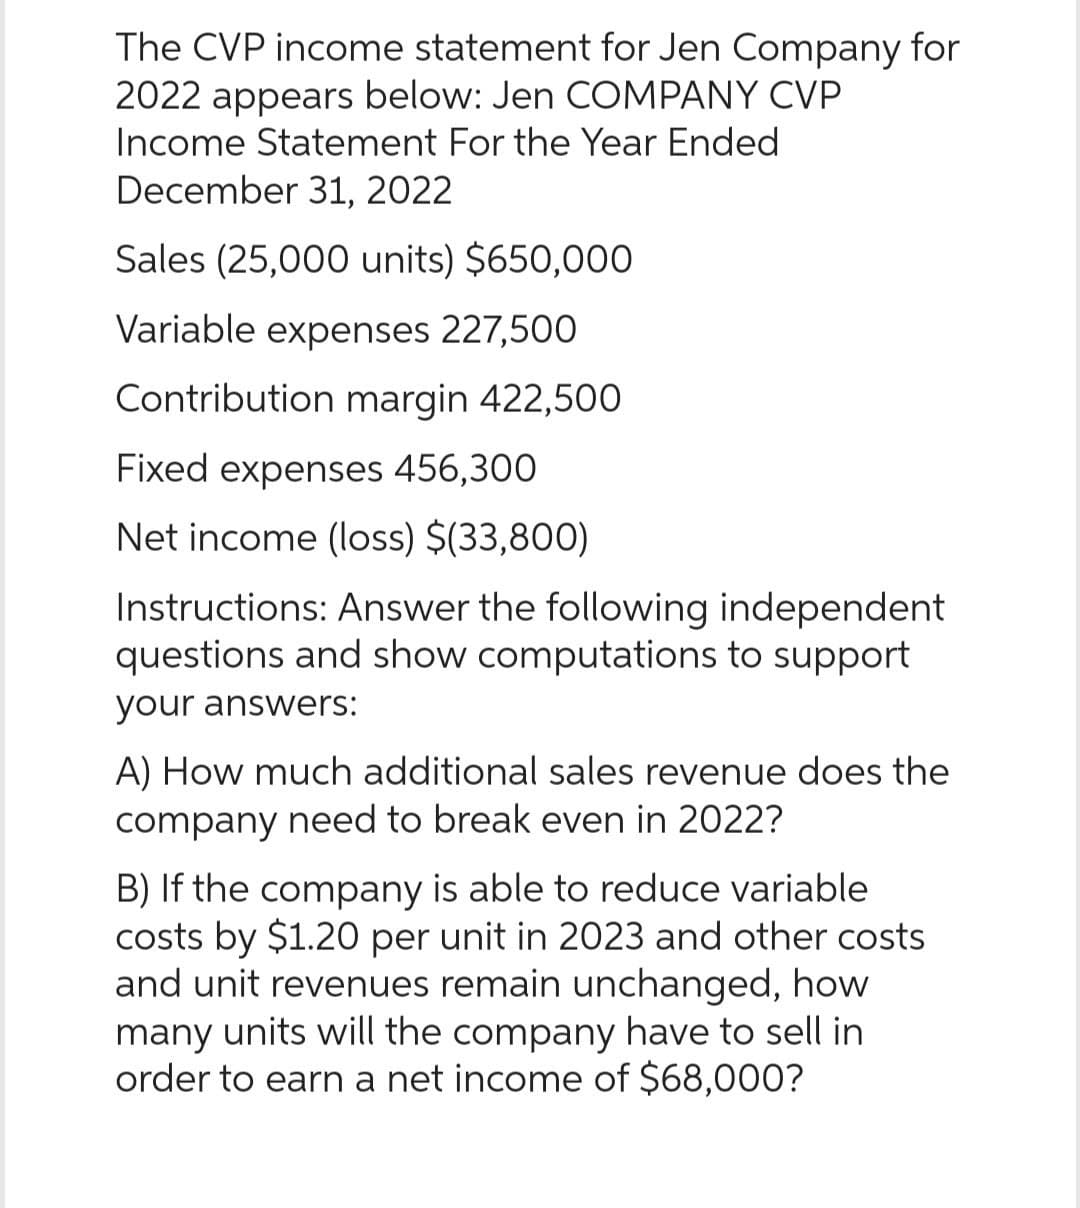 The CVP income statement for Jen Company for
2022 appears below: Jen COMPANY CVP
Income Statement For the Year Ended
December 31, 2022
Sales (25,000 units) $650,000
Variable expenses 227,500
Contribution margin 422,500
Fixed expenses 456,300
Net income (loss) $(33,800)
Instructions: Answer the following independent
questions and show computations to support
your answers:
A) How much additional sales revenue does the
company need to break even in 2022?
B) If the company is able to reduce variable
costs by $1.20 per unit in 2023 and other costs
and unit revenues remain unchanged, how
many units will the company have to sell in
order to earn a net income of $68,000?